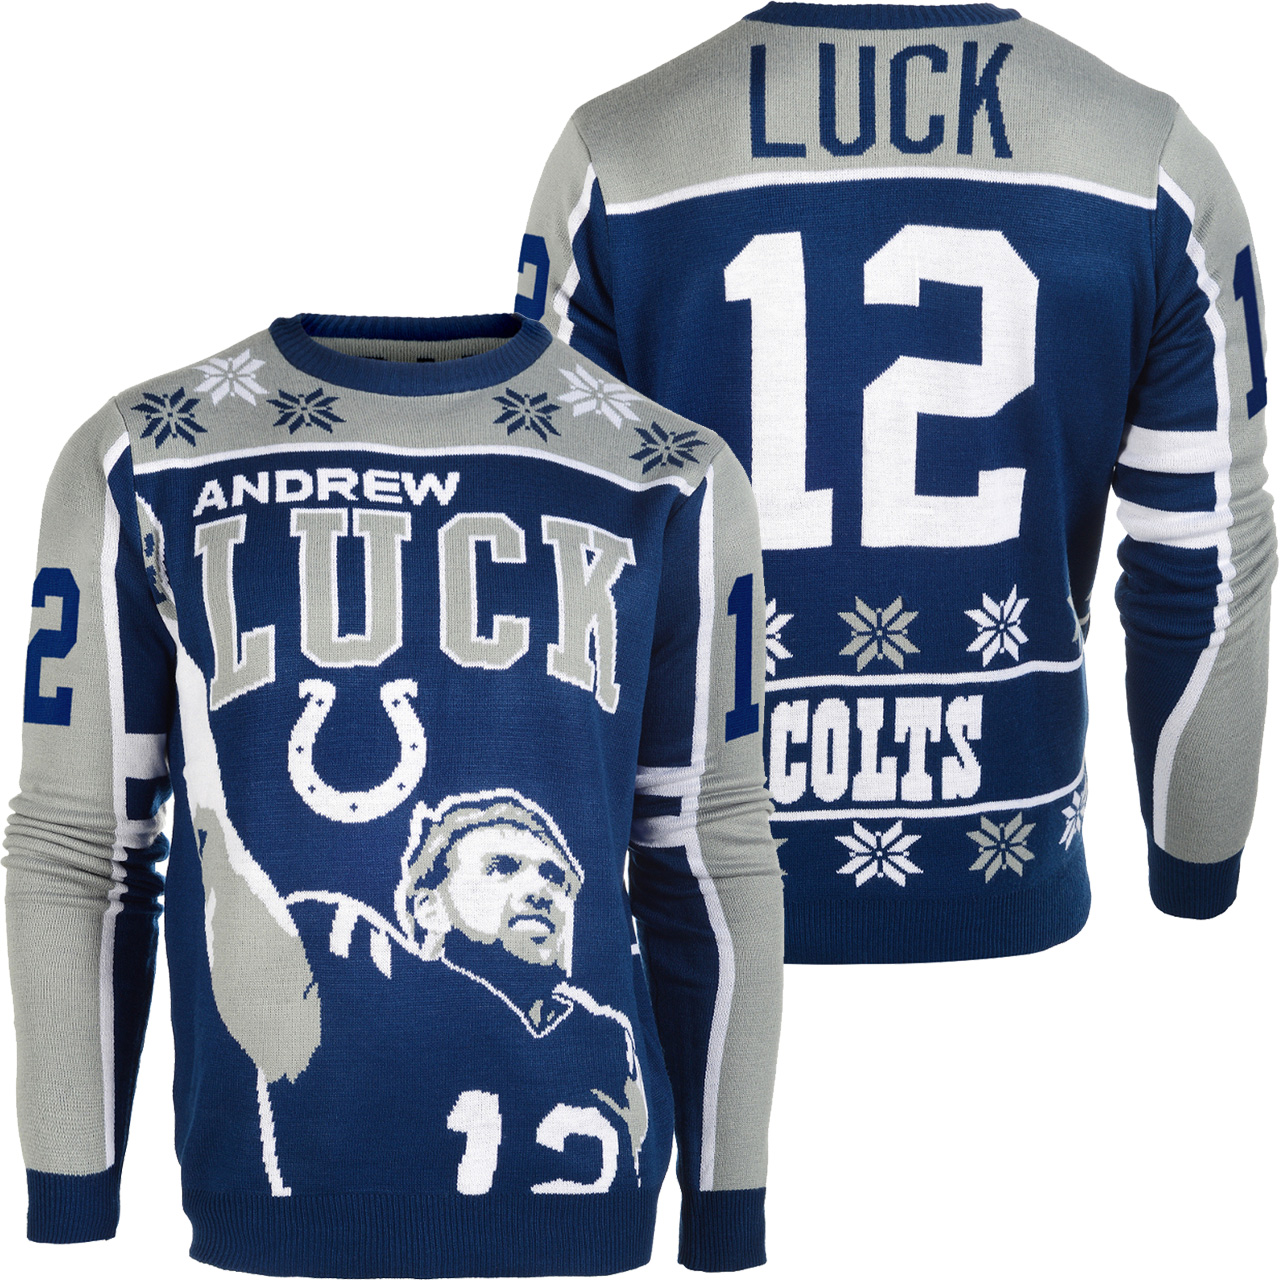 Andrew Luck #12 Indianapolis Colts NFL Player Ugly Sweater